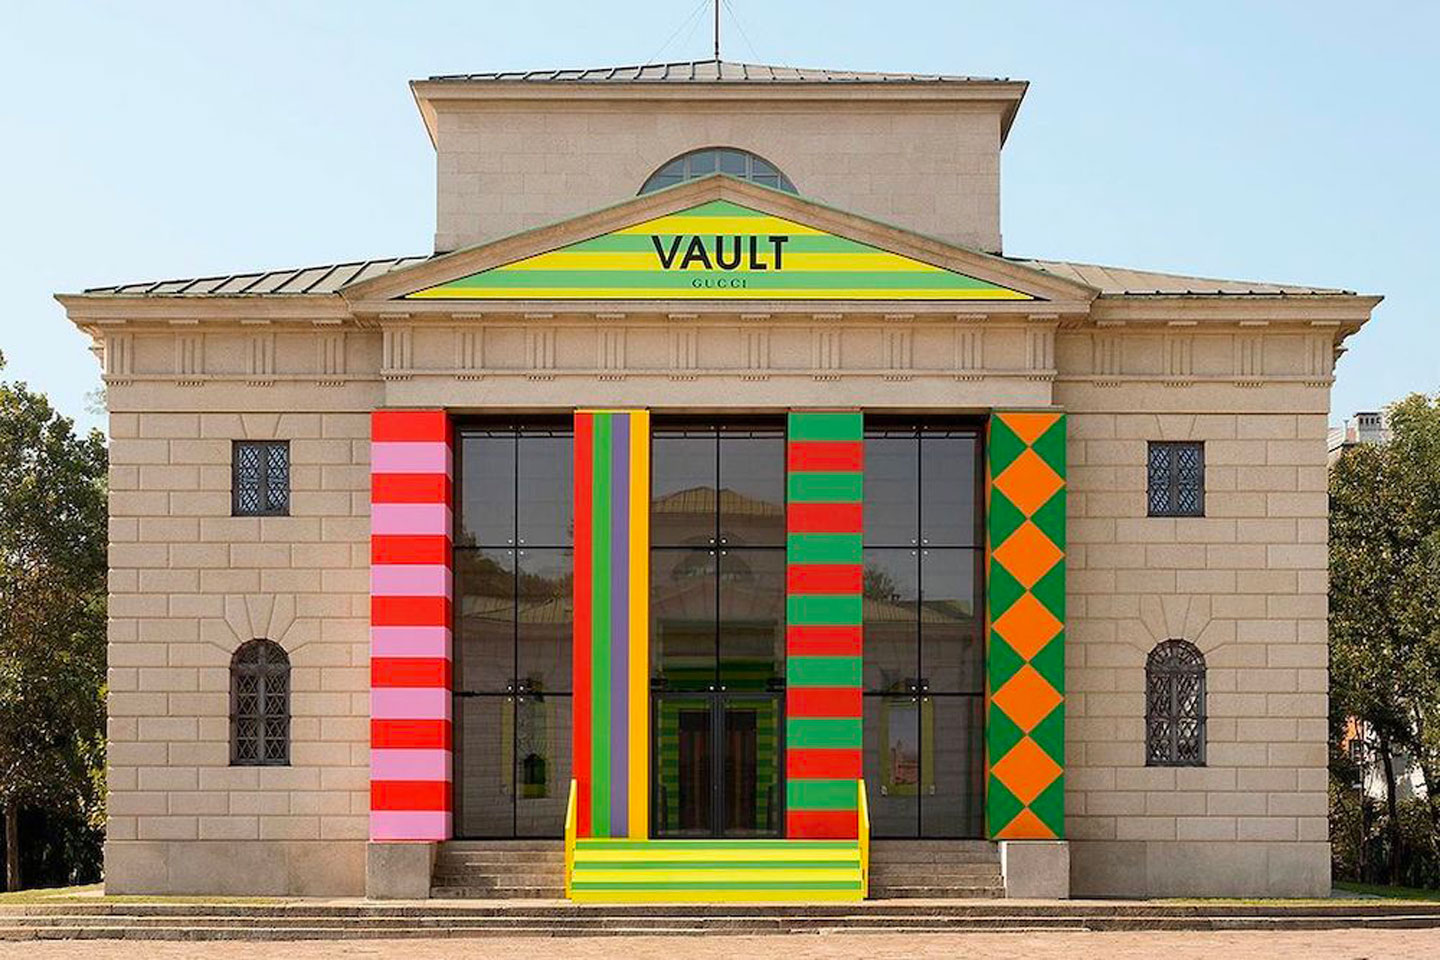 Under Michele's creative direction, Gucci launched Vault as an experimental space 